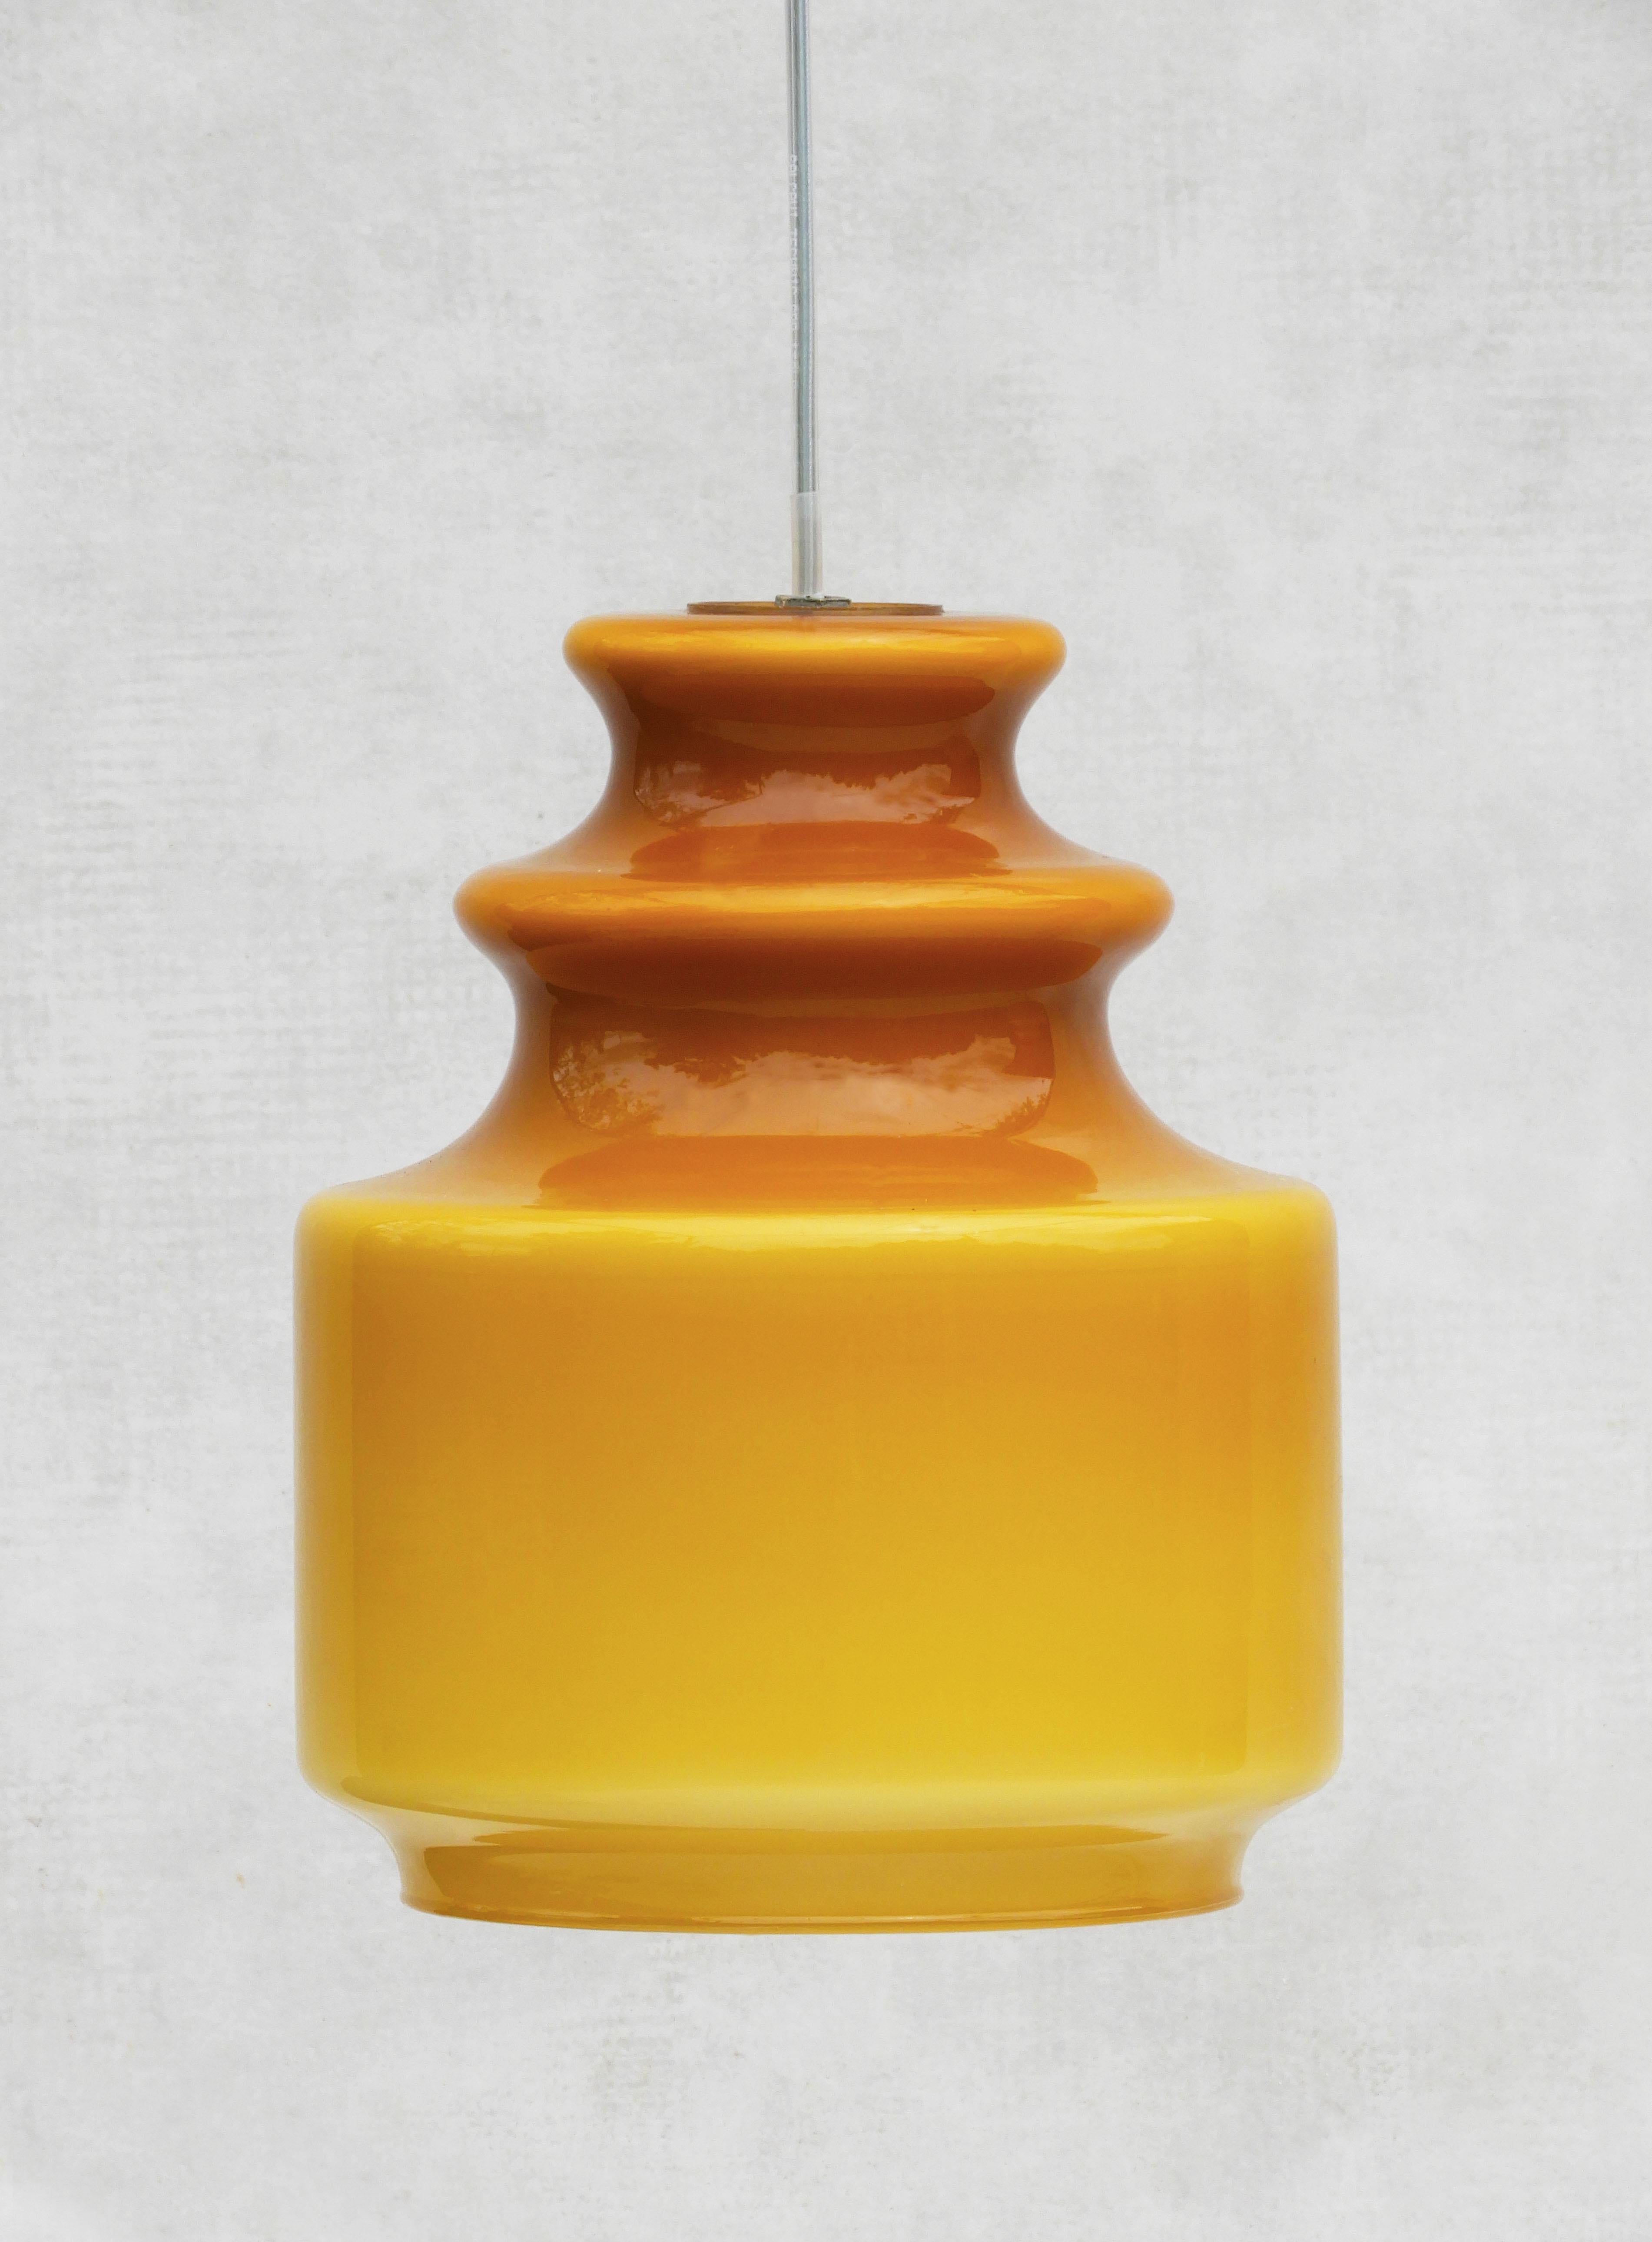 French Amber opaline ceiling lights from 70s France

A rare pair of original pendant Lights in high gloss caramel colour opaline glass with characteristic white interior layer giving off a wonderful diffused light when lit.  Original 'floating'